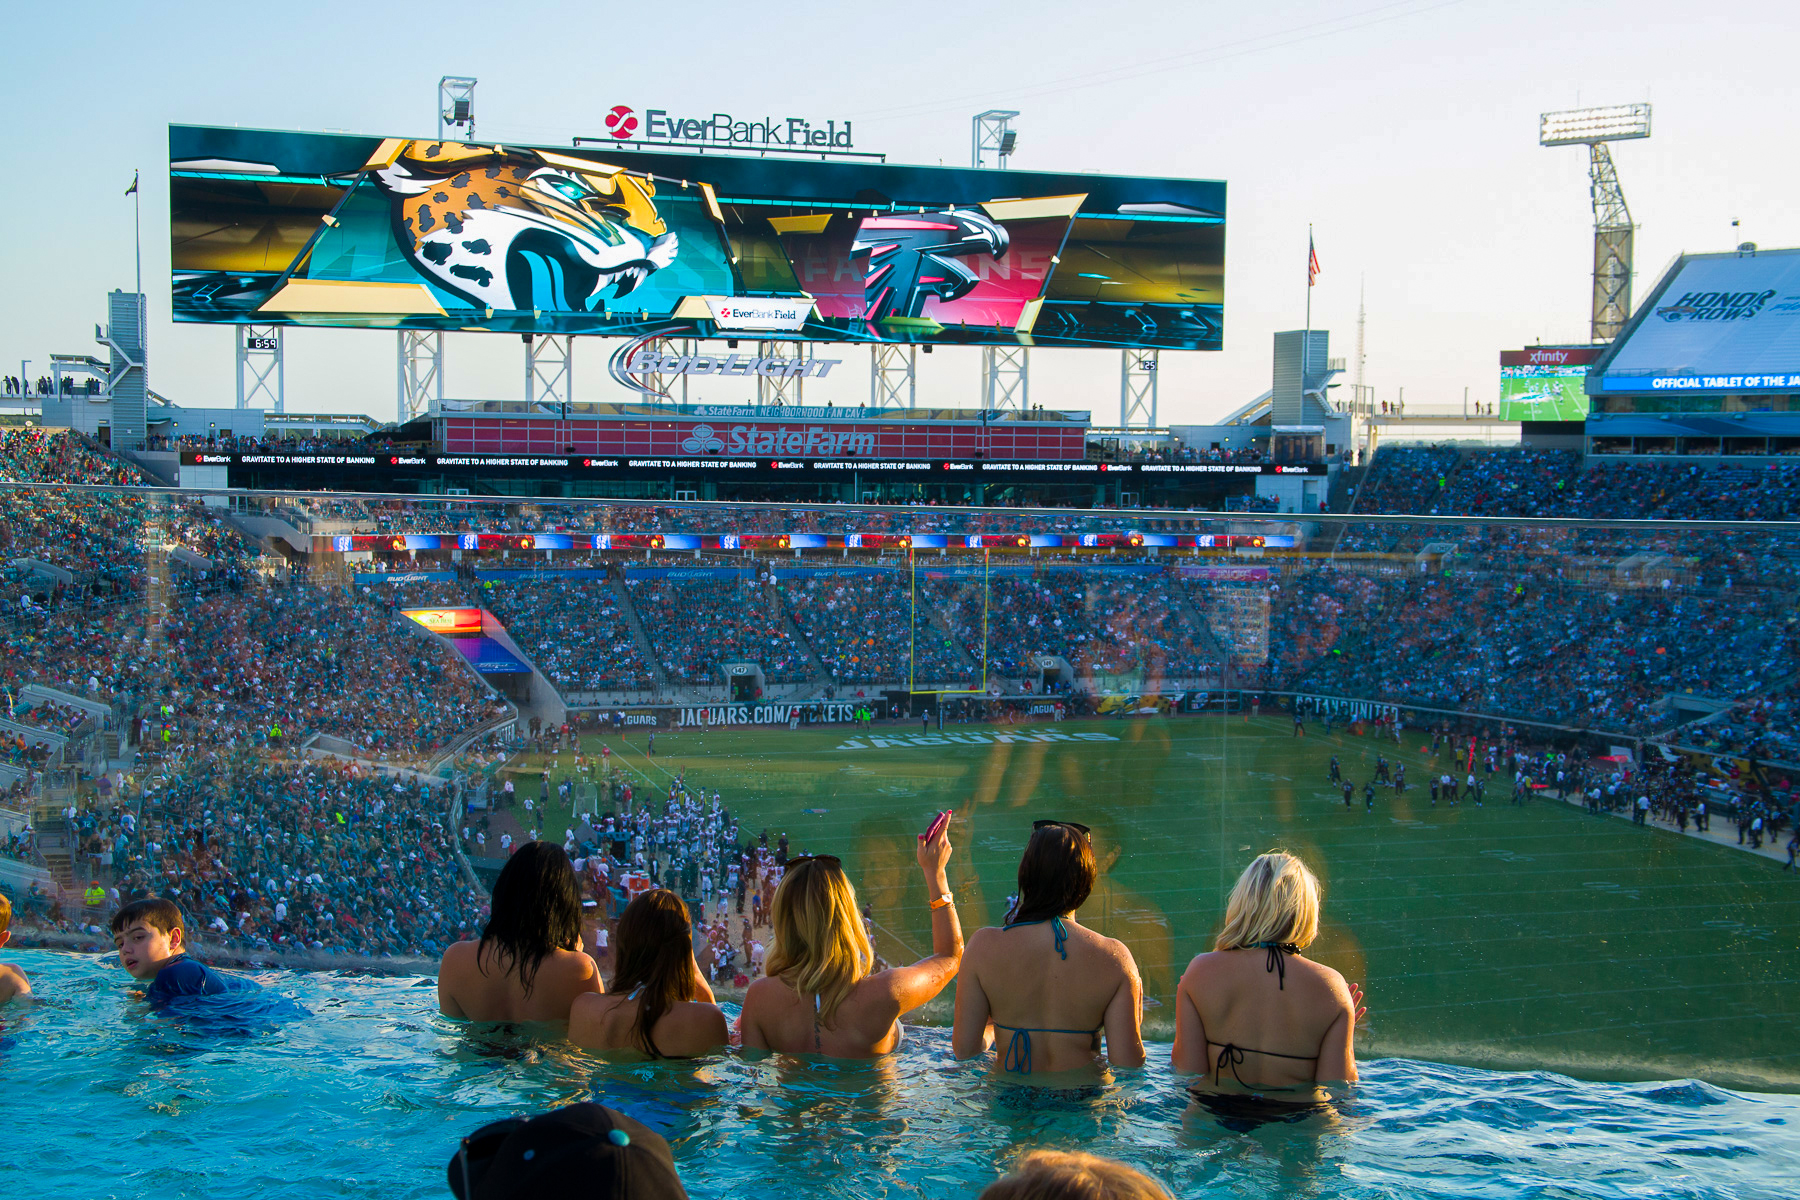 Showing a pool in an NFL Stadium.